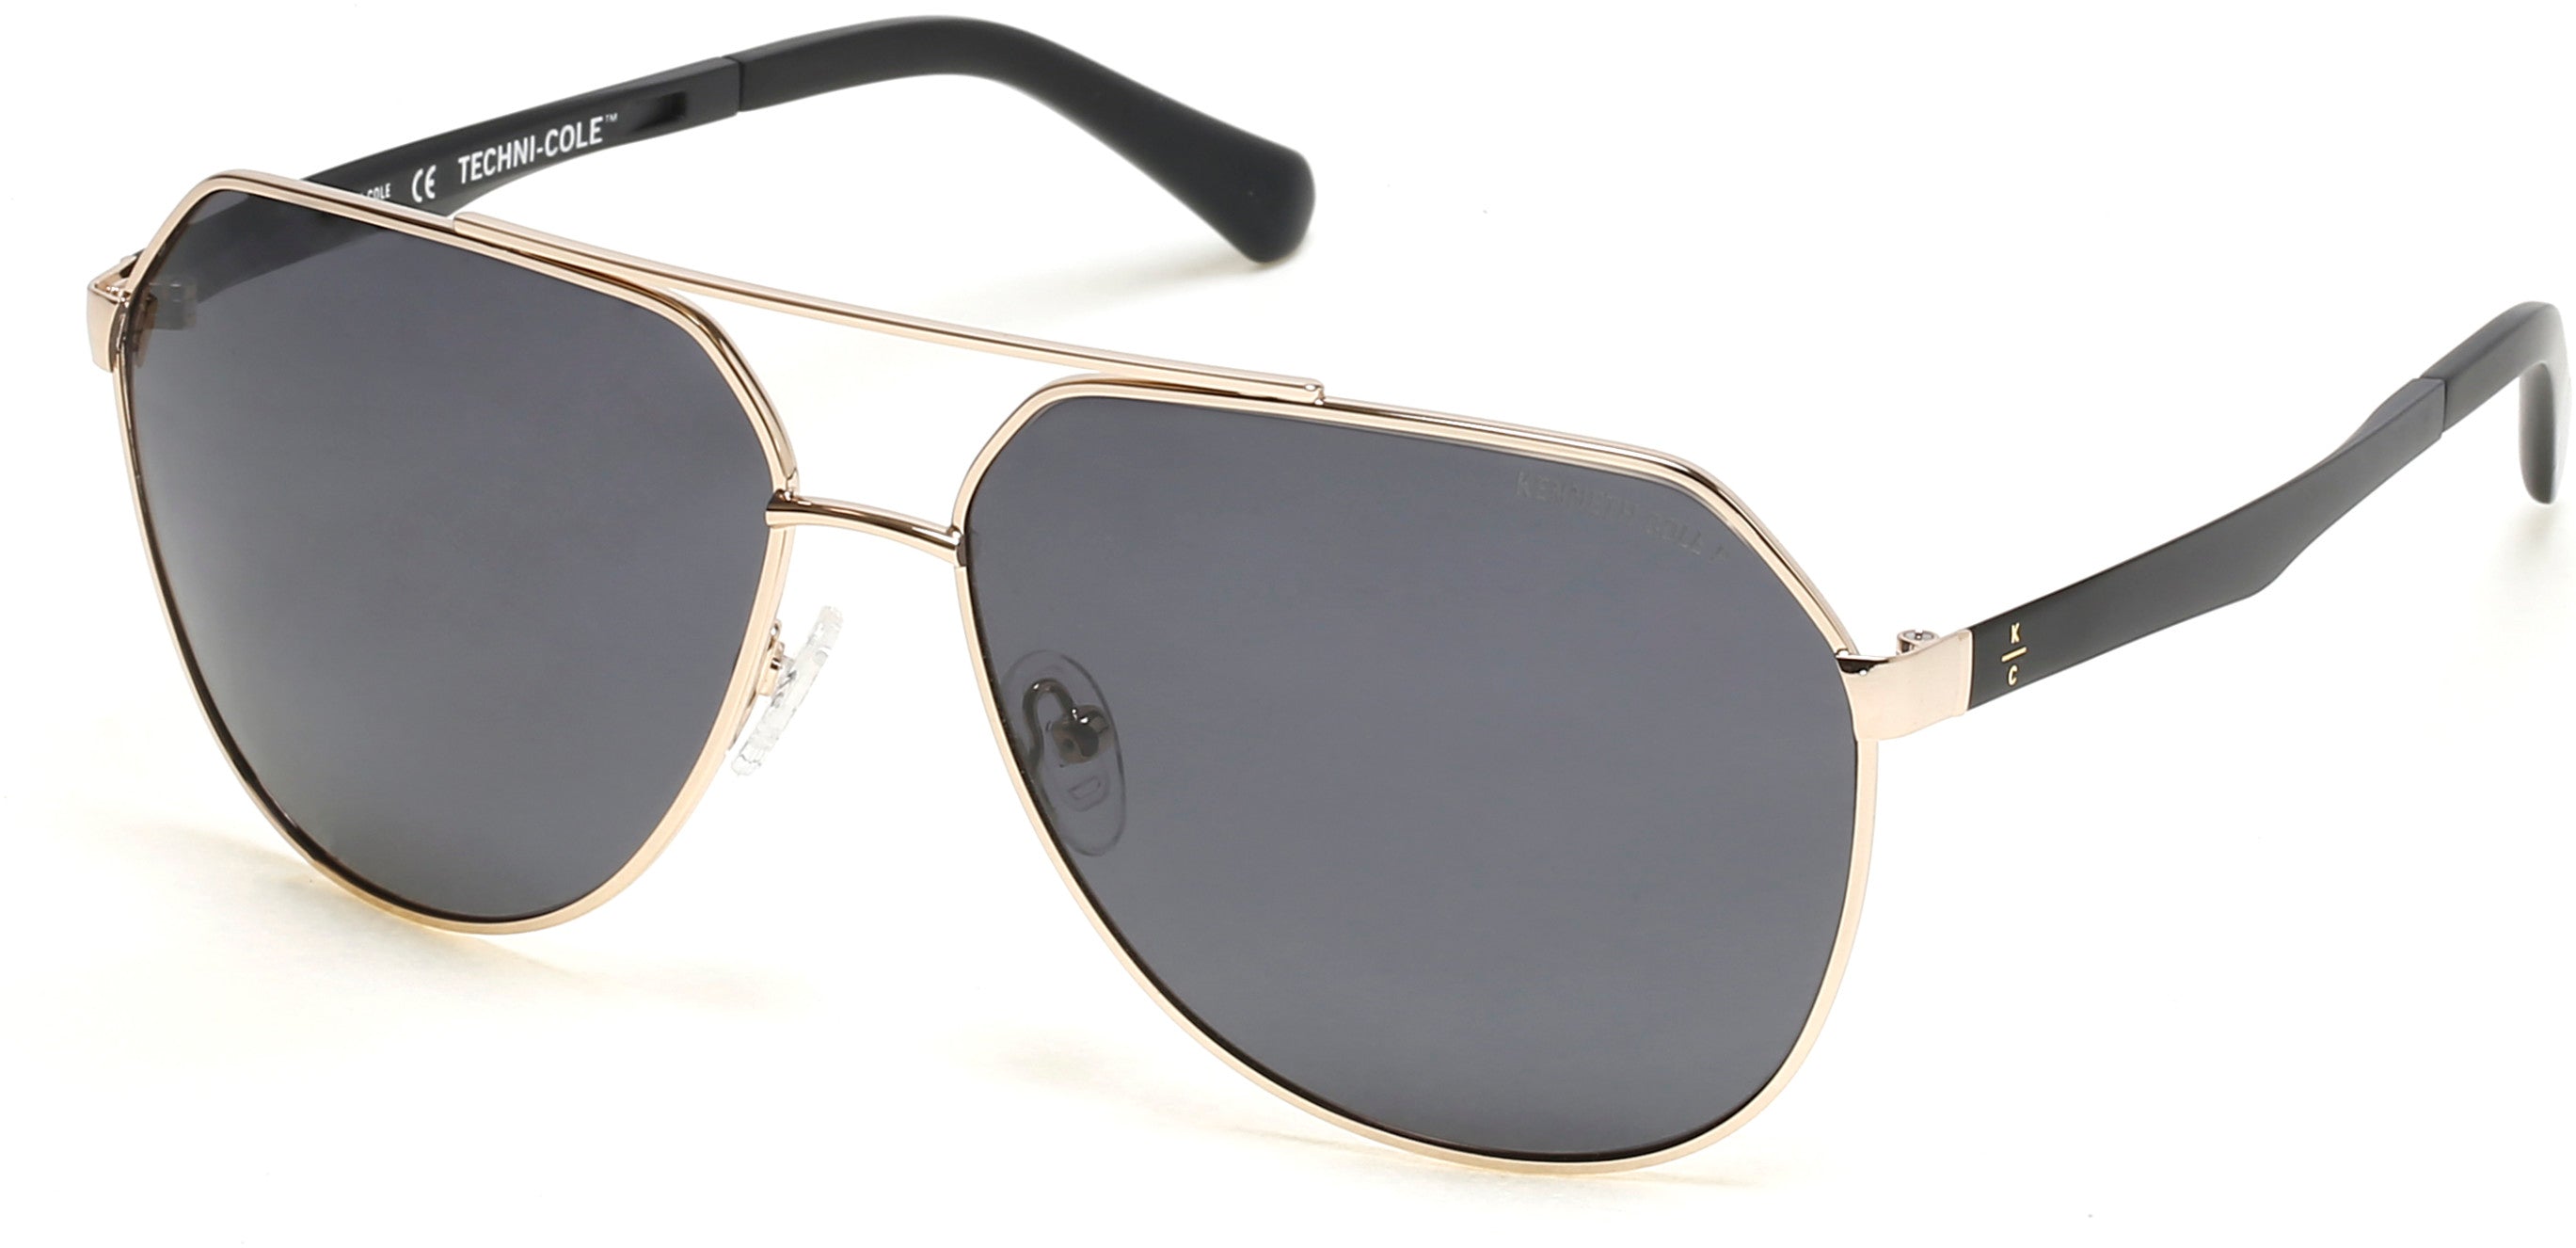 Kenneth Cole New York,Kenneth Cole Reaction KC7252 Pilot Sunglasses 32D-32D - Gold / Smoke Polarized